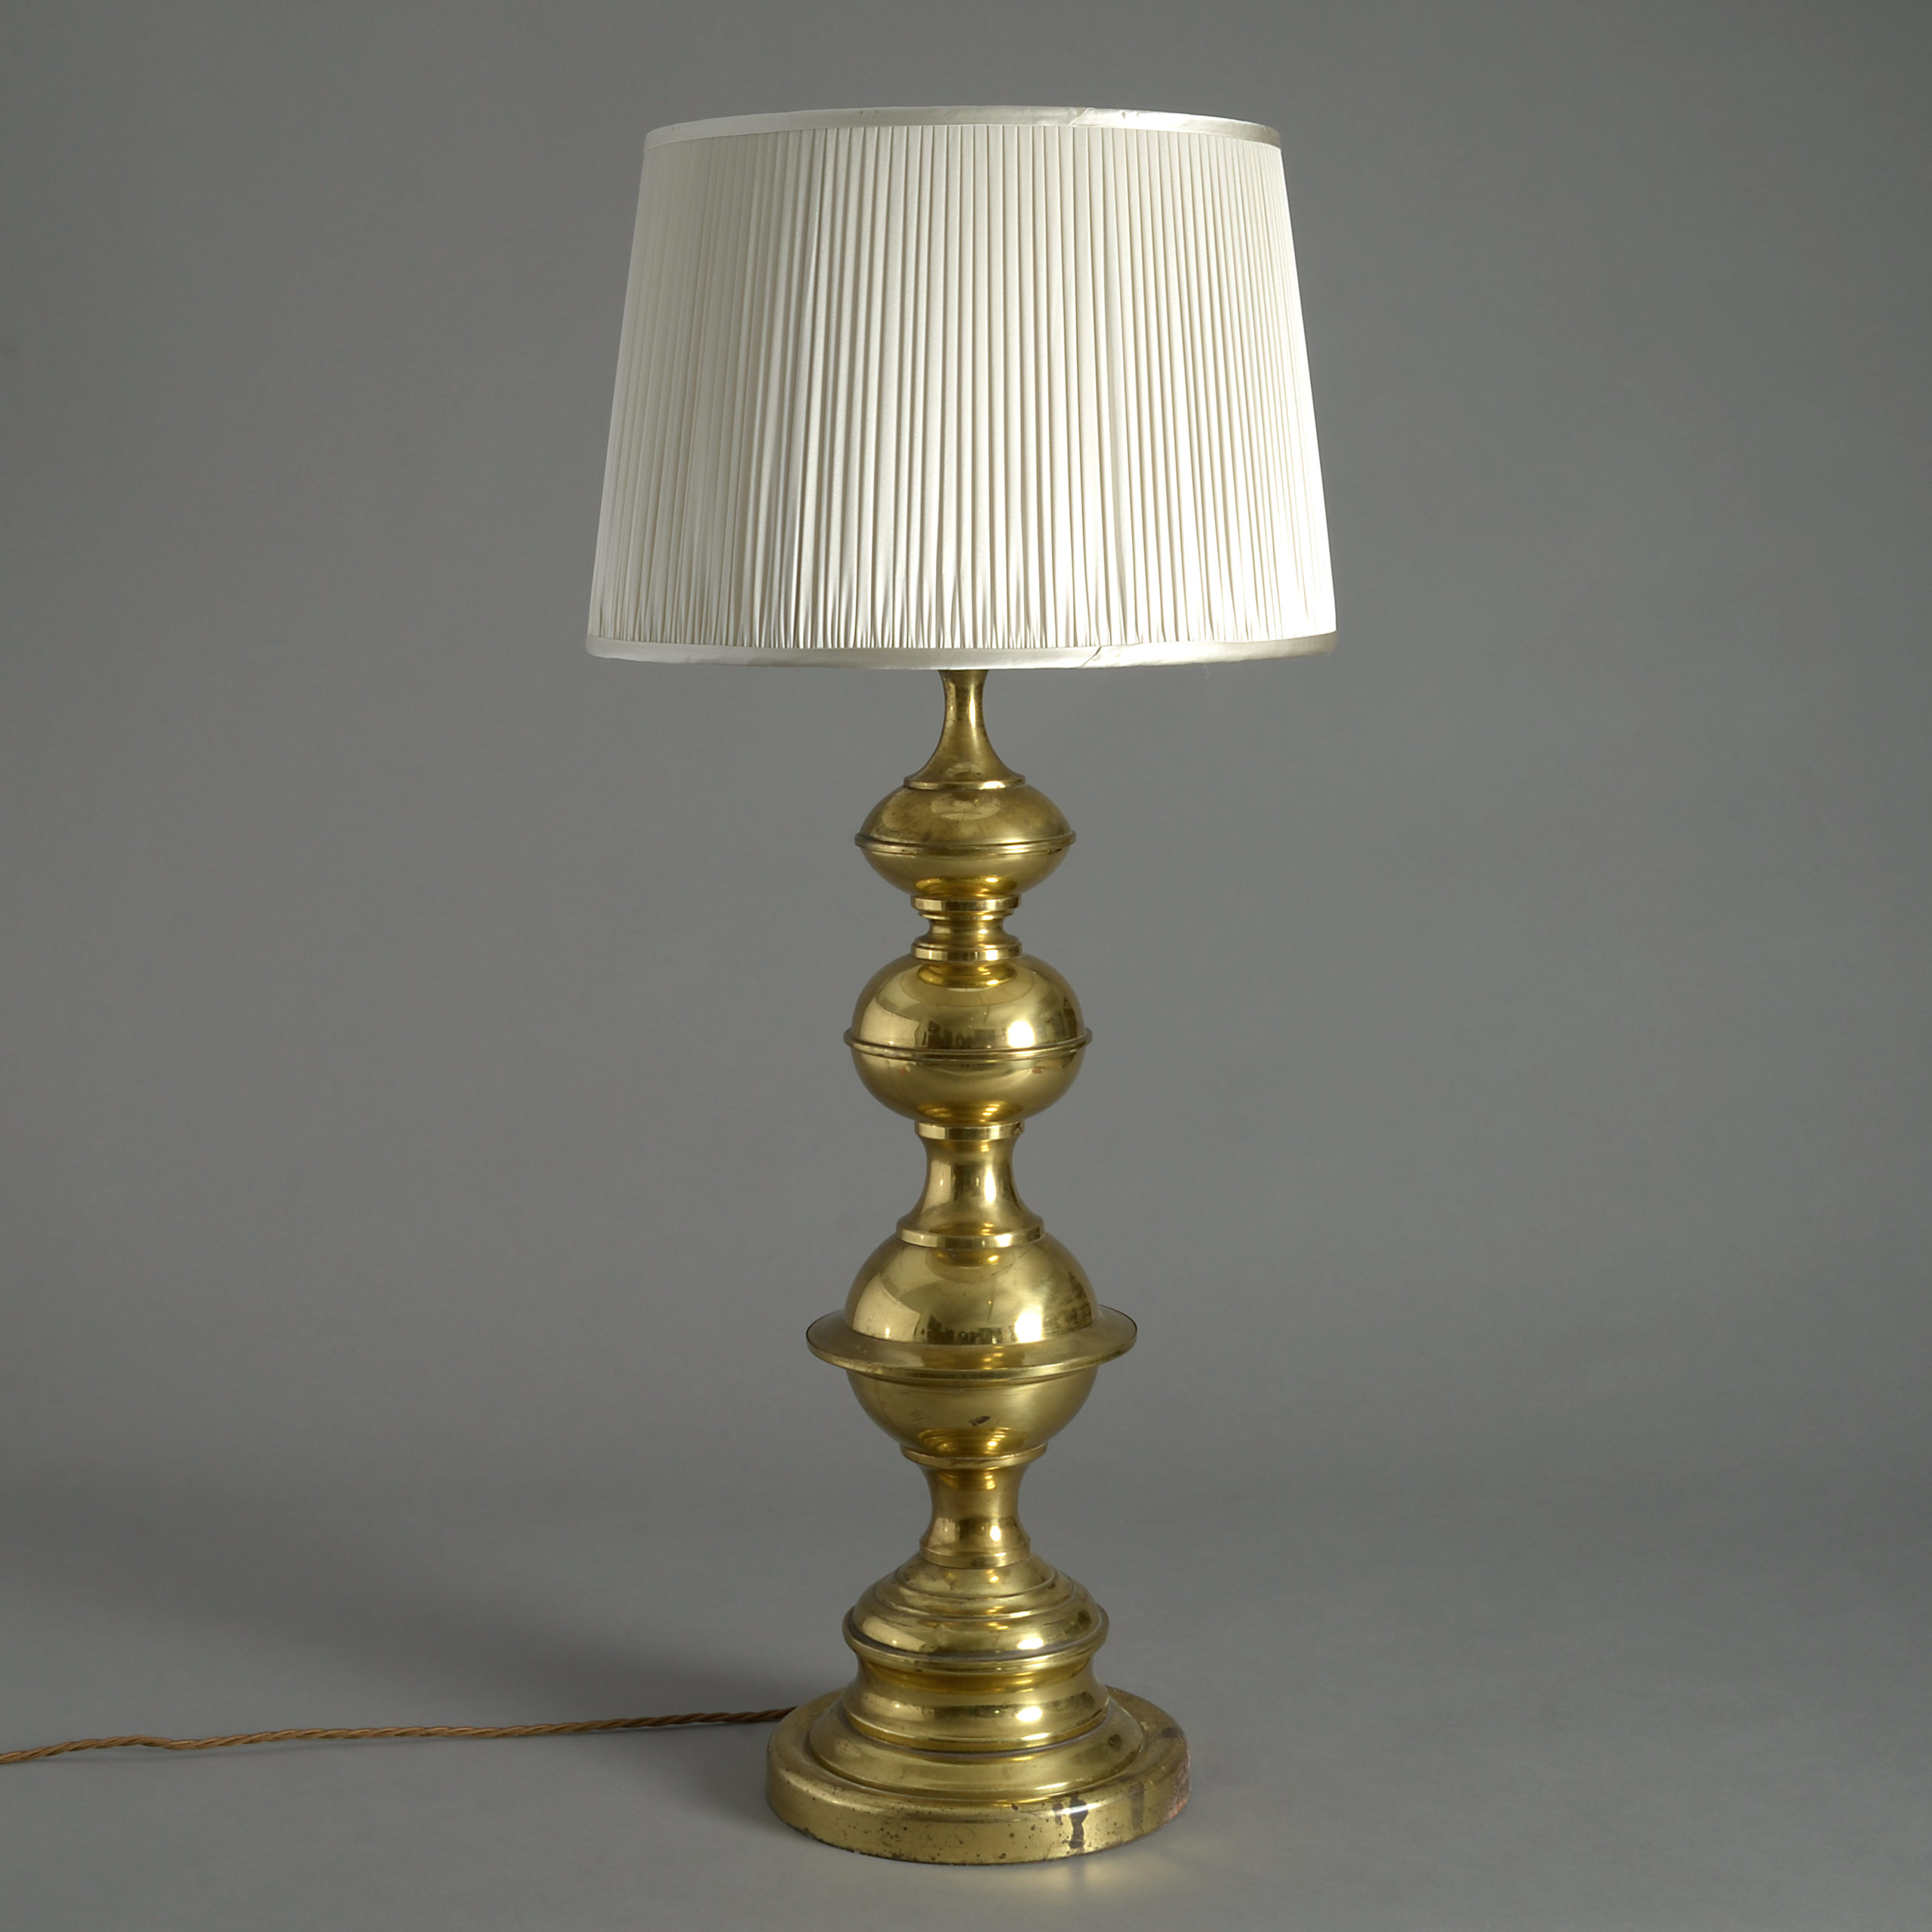 A Mid-20th Century Tall Brass Triple Gourd Lamp | Timothy Langston Fine Art  & Antiques